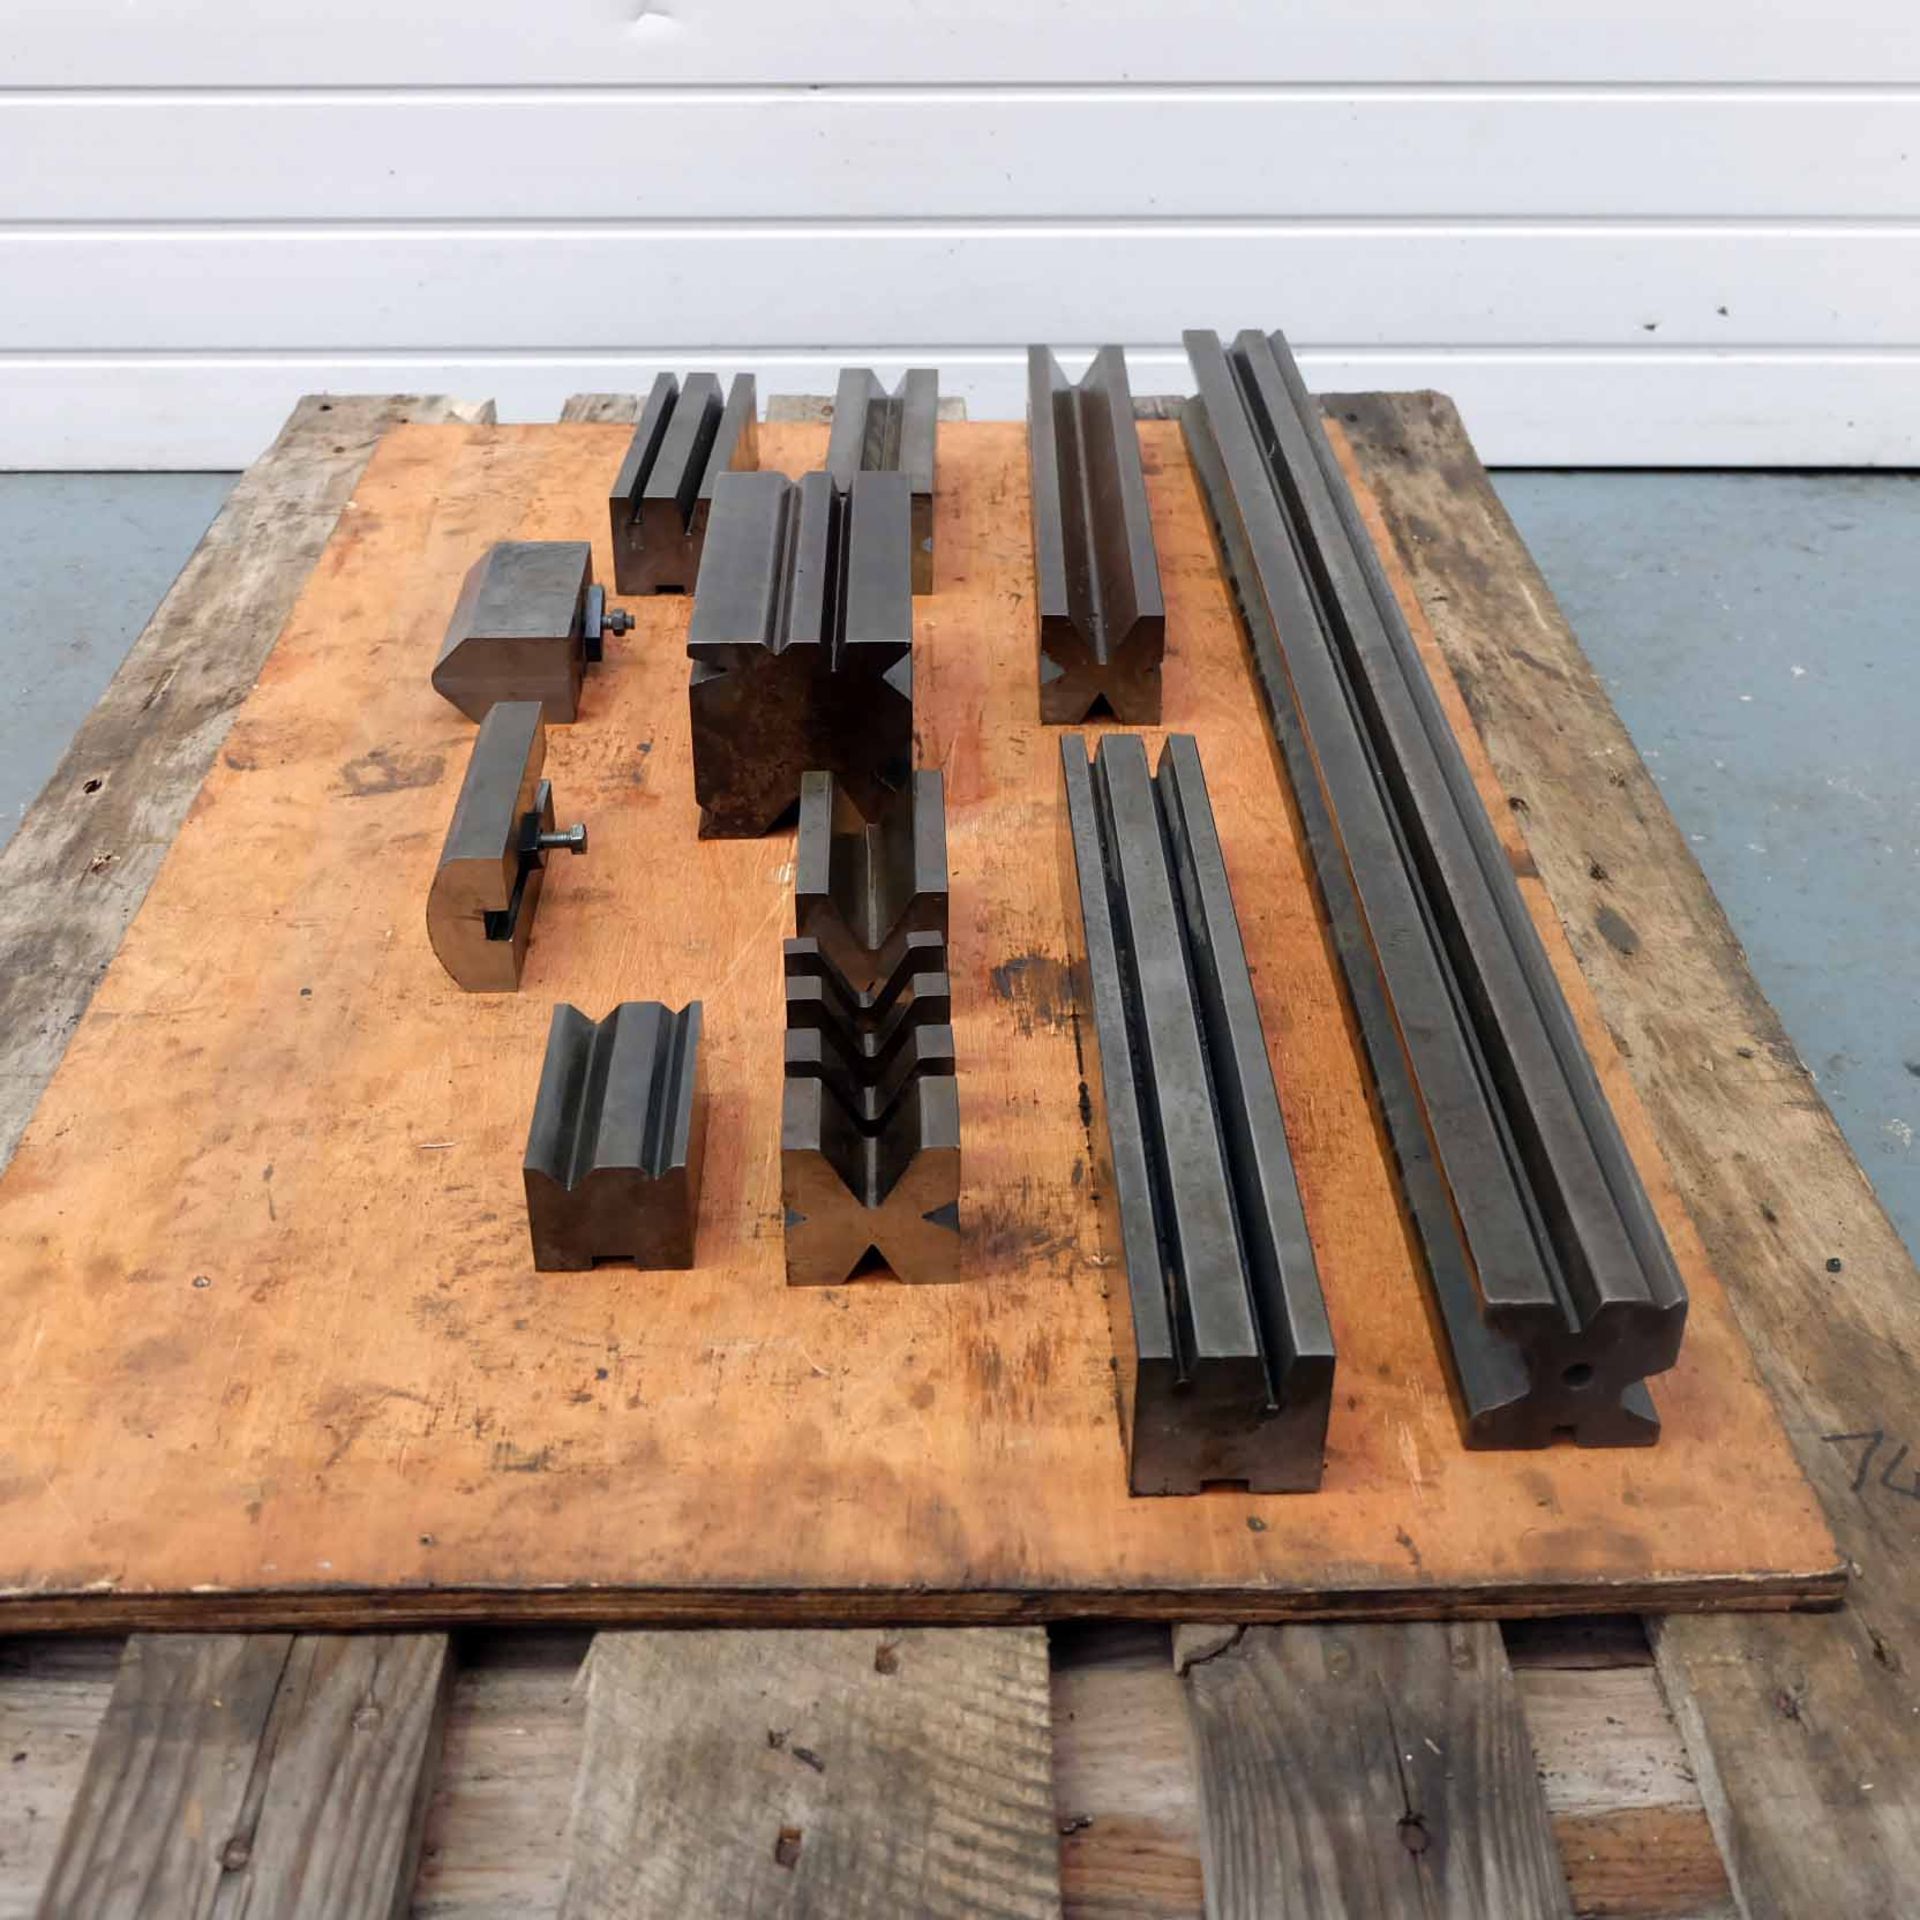 Quantity of Miscalaneous Press Brake Bottom Tooling. Various Sizes & Shapes. - Image 3 of 7